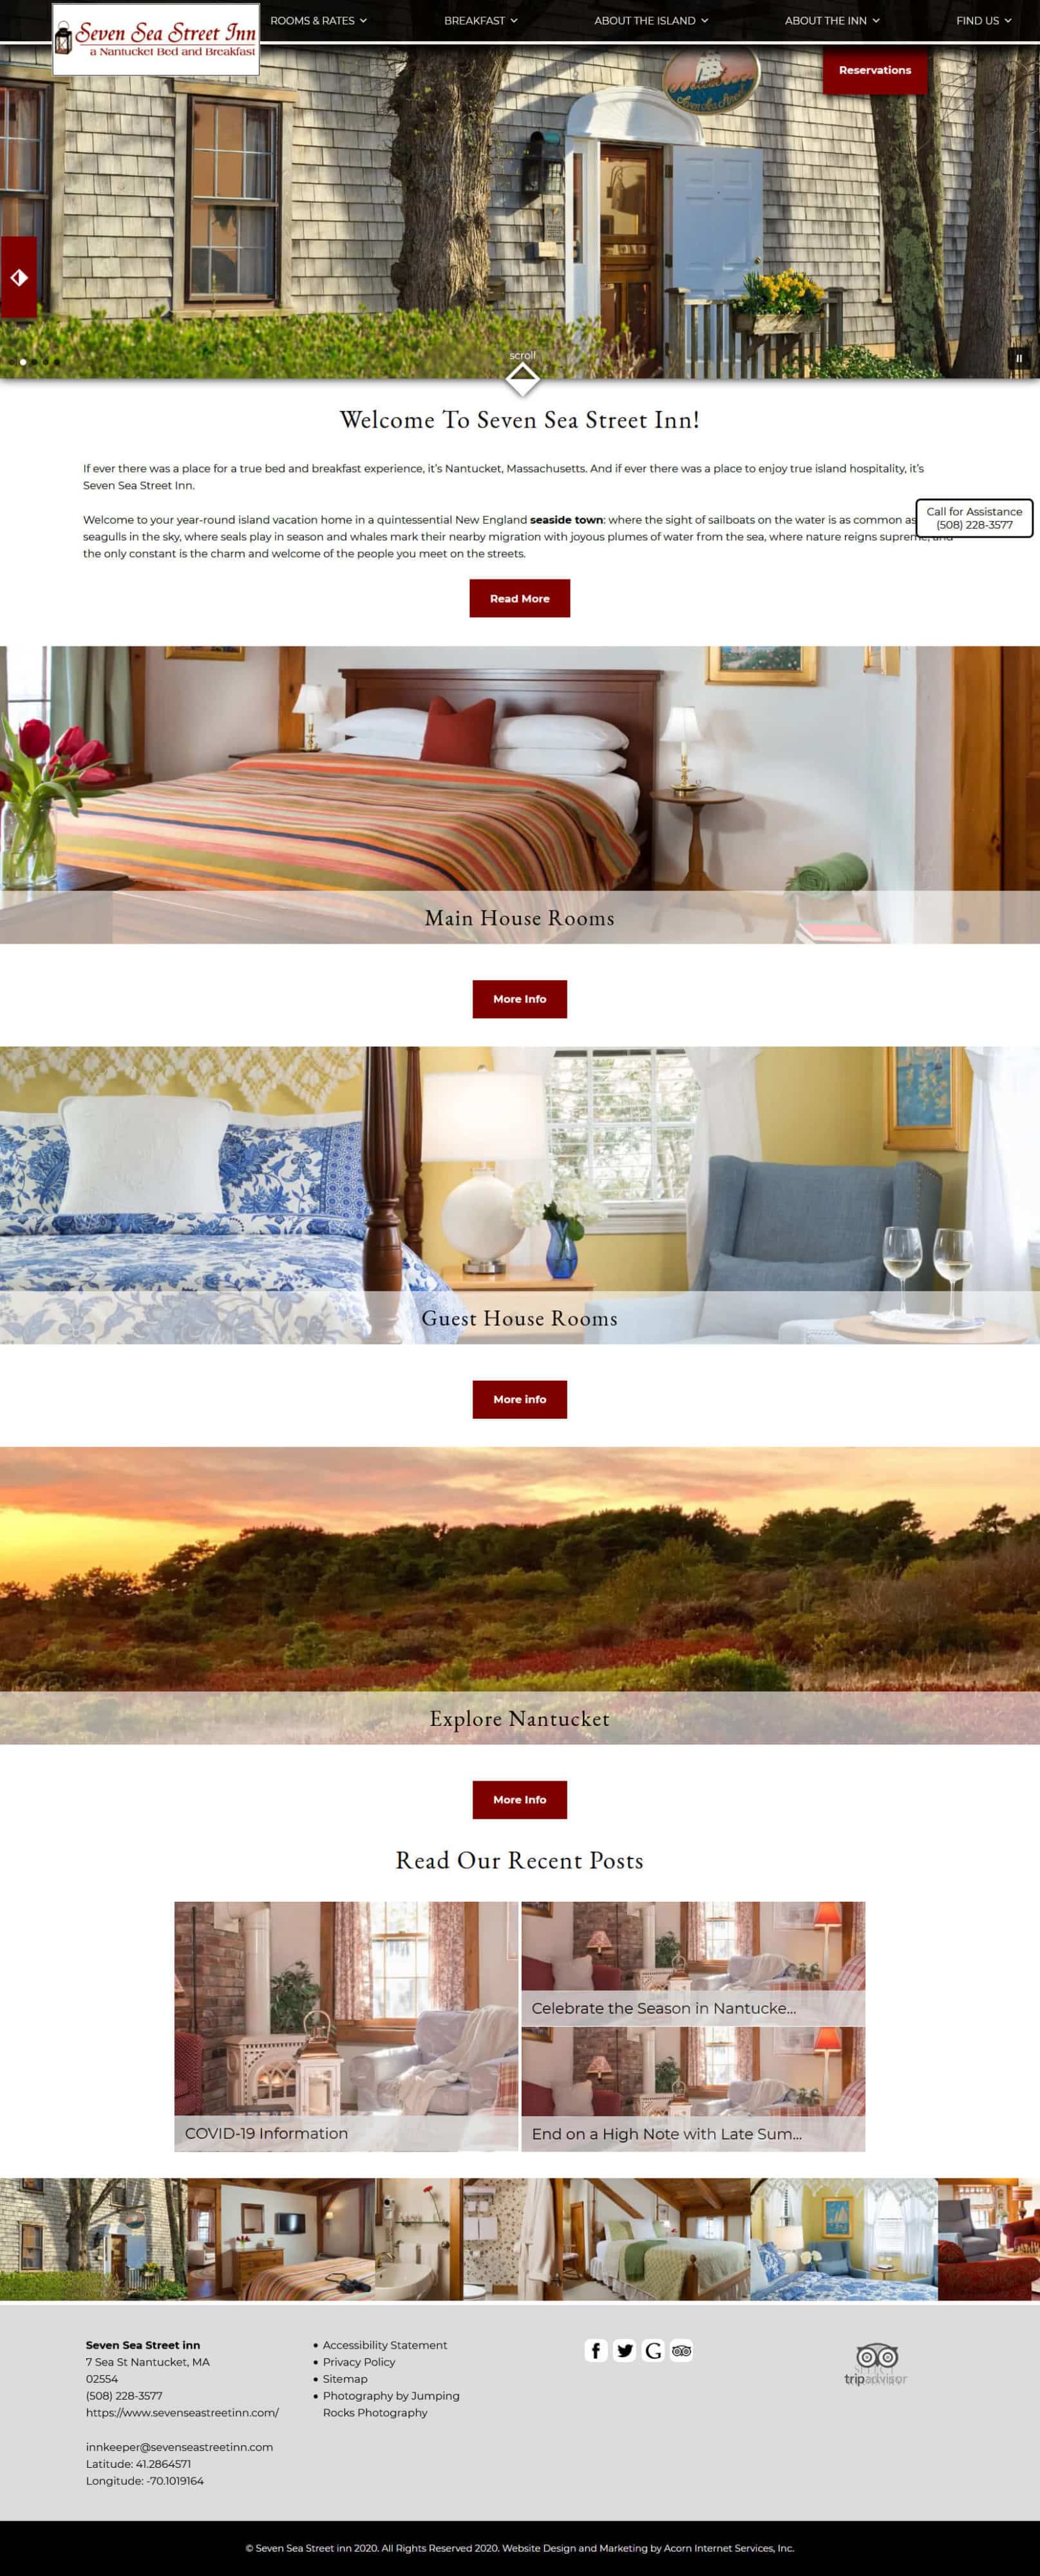 Home page of Seven Sea Street Inn's new website